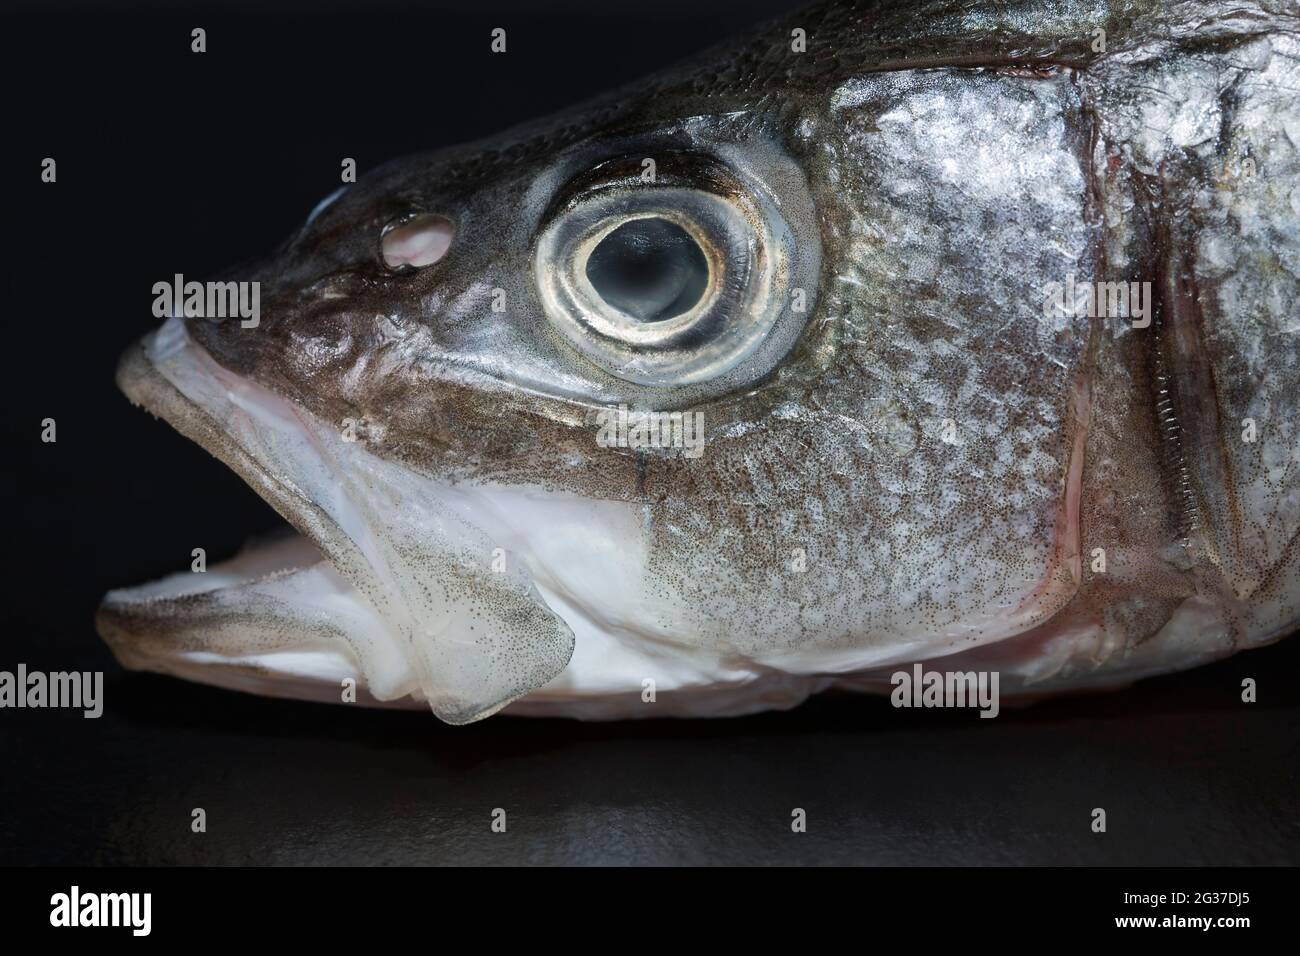 The head of a European sea bass (Dicentrarchus labrax), Germany Stock Photo